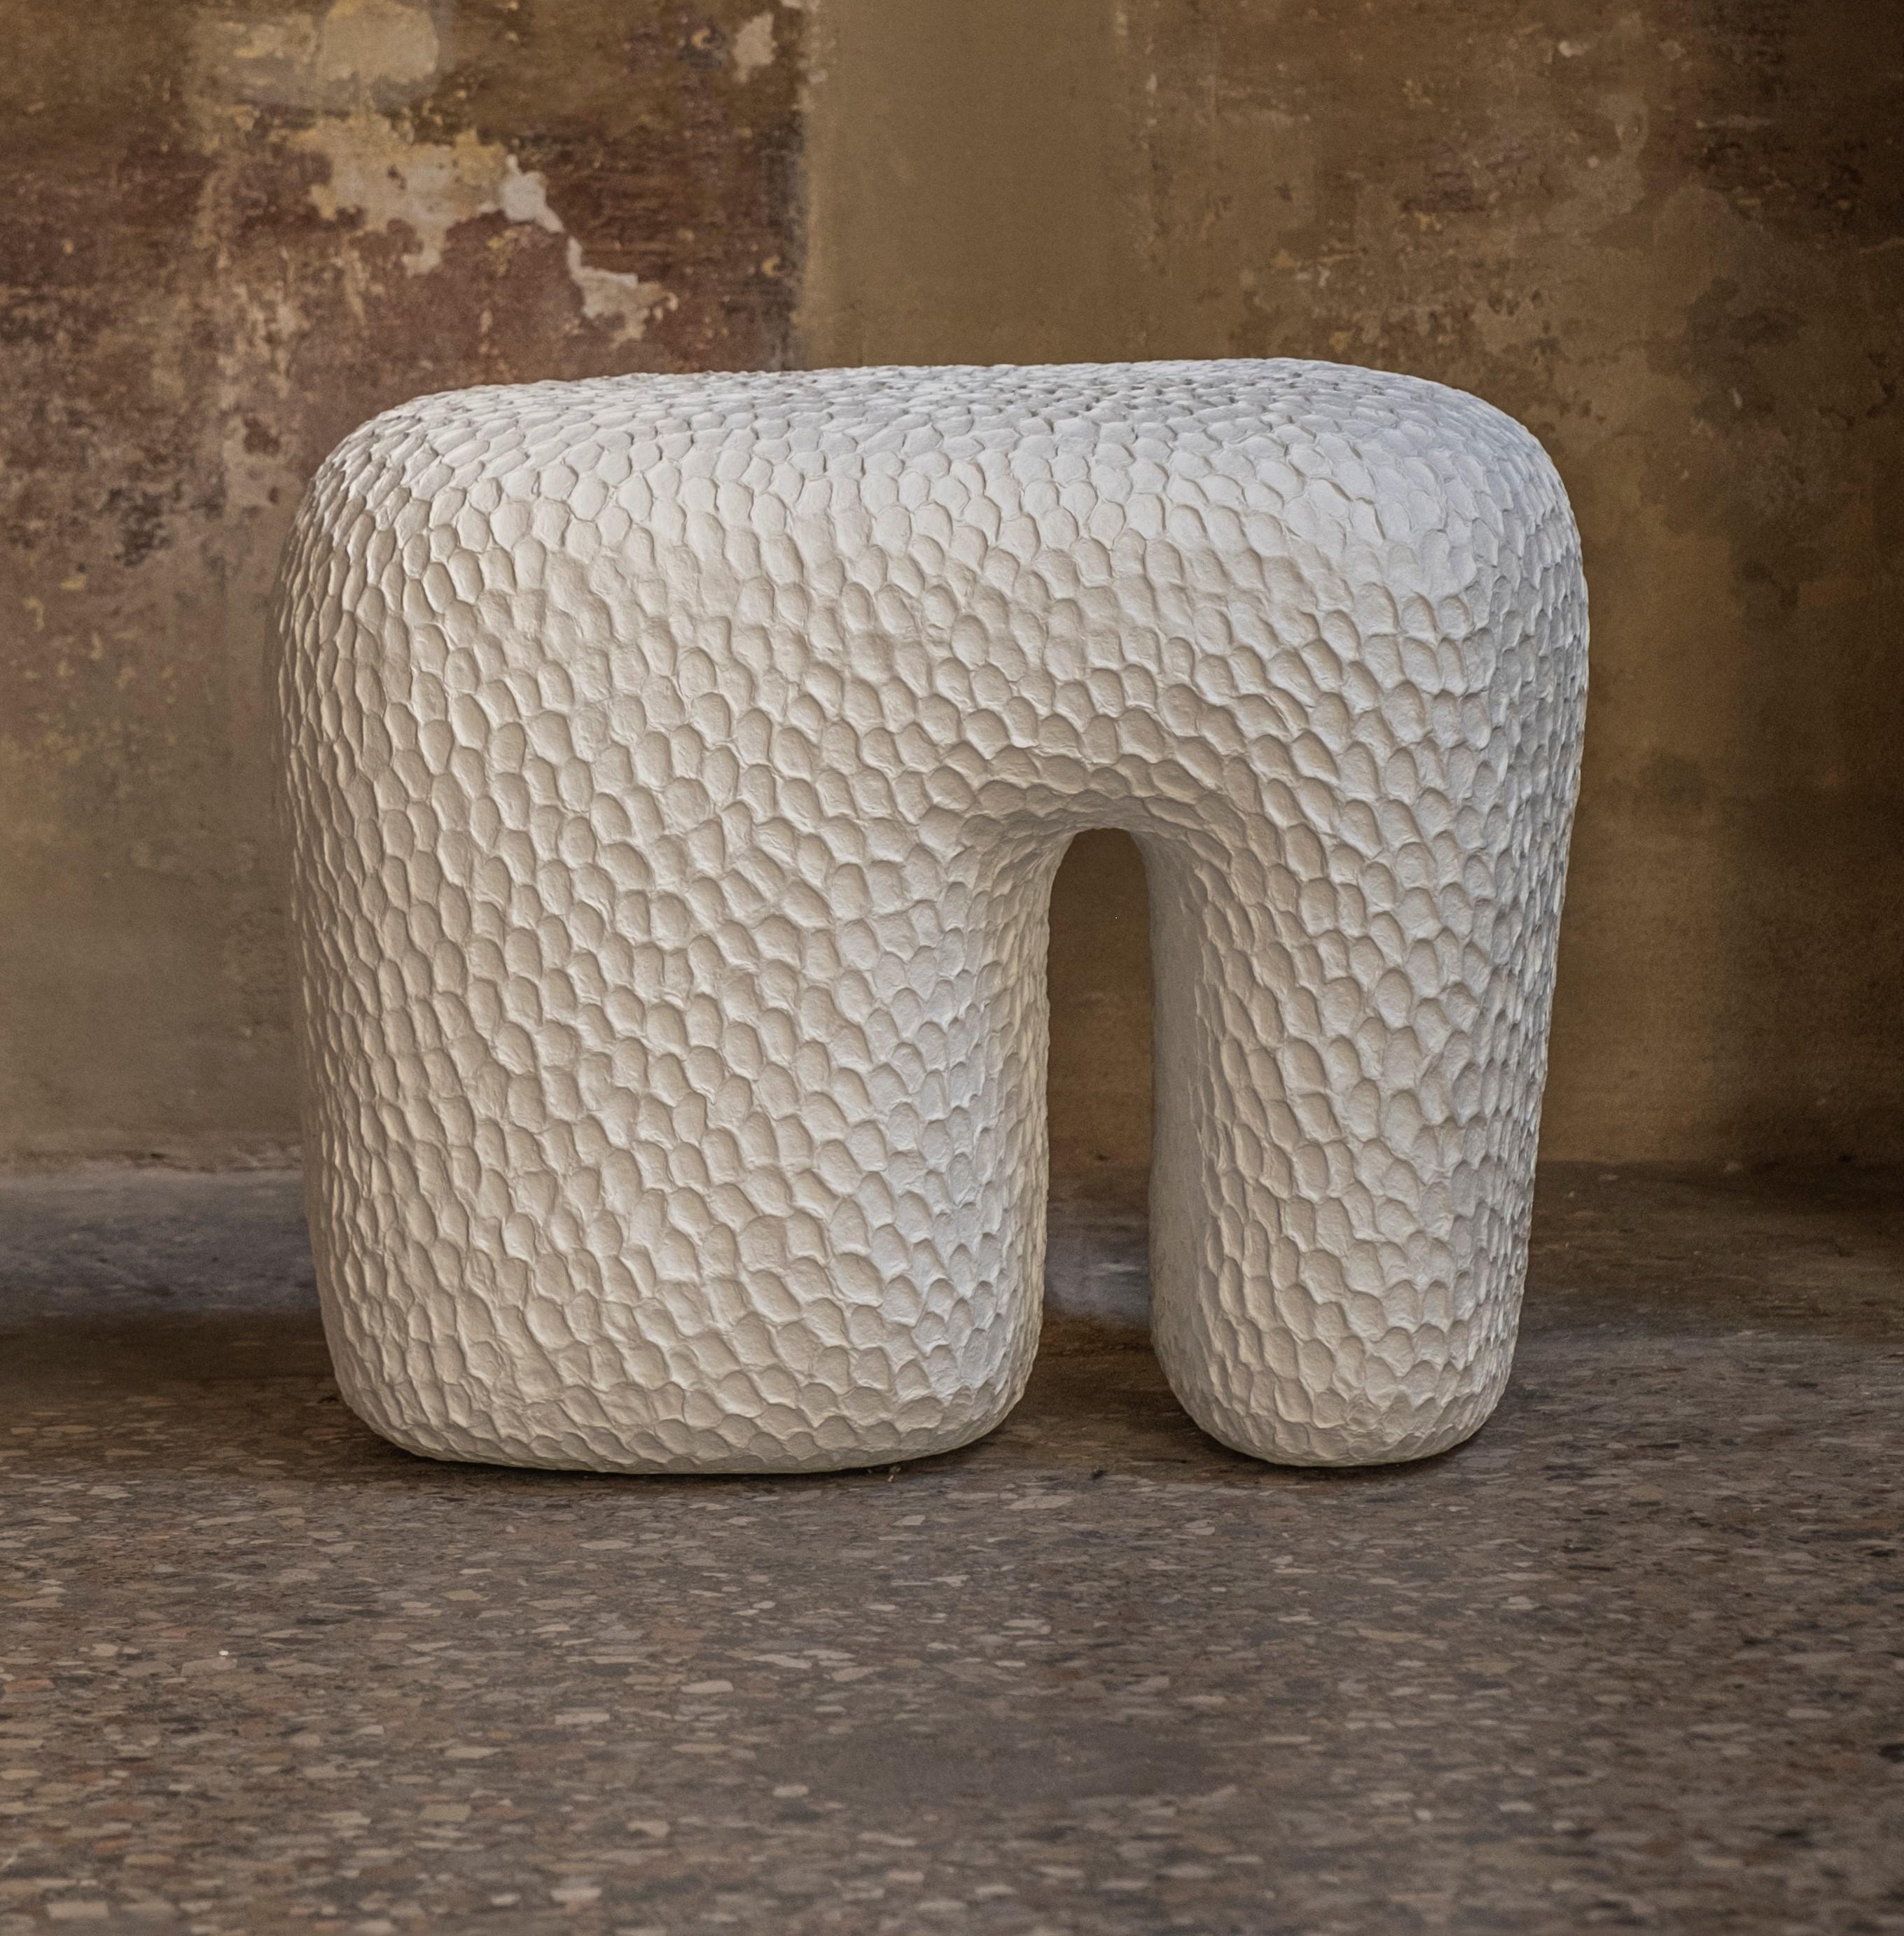 Duzhyi stool by Faina
Design: Victoriya Yakusha.
Material: Hand-sculpted in the author's signature sustainable material Ztista - a blend of paper,
clay, hay, and other live elements conceived to one day return to nature. Wooden